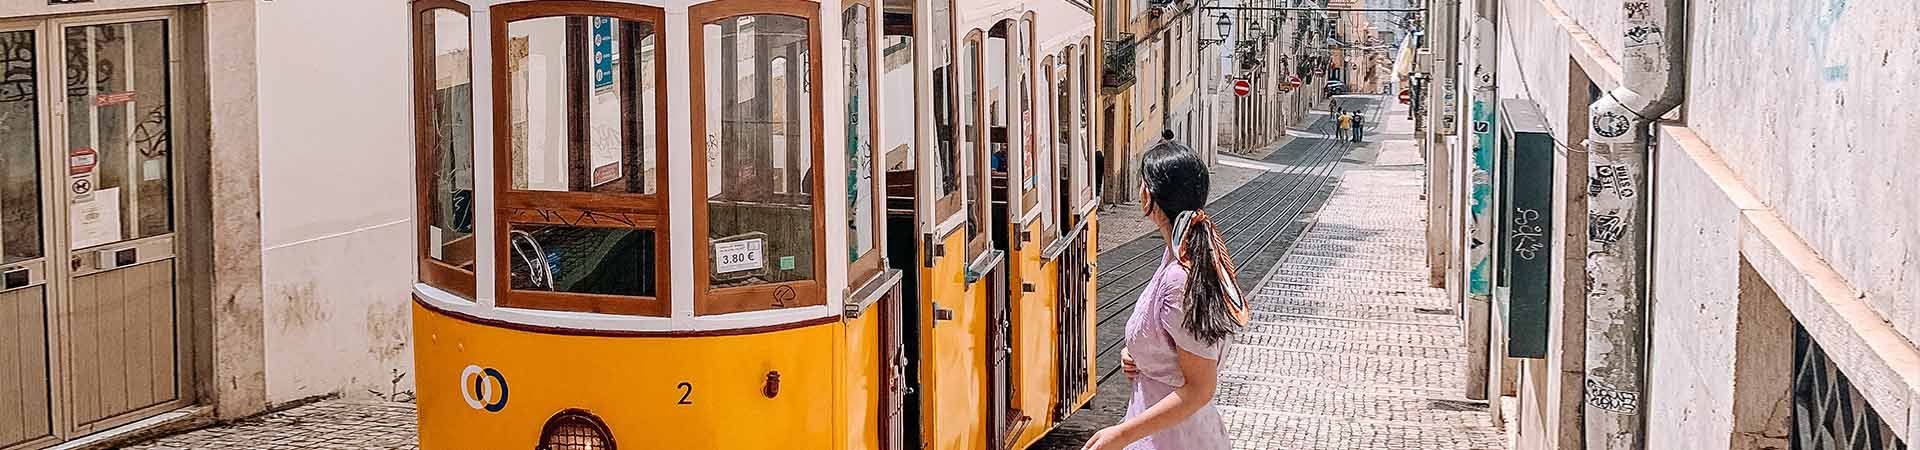 In the center of the image, a yellow and white Lisbon tram passes through one of Lisbon's cobbled streets, lined with buildings with old facades. To the right of the tram, there is a brunette girl, wearing a lilac dress and her hair tied back with a colored scarf, looking at the tram.